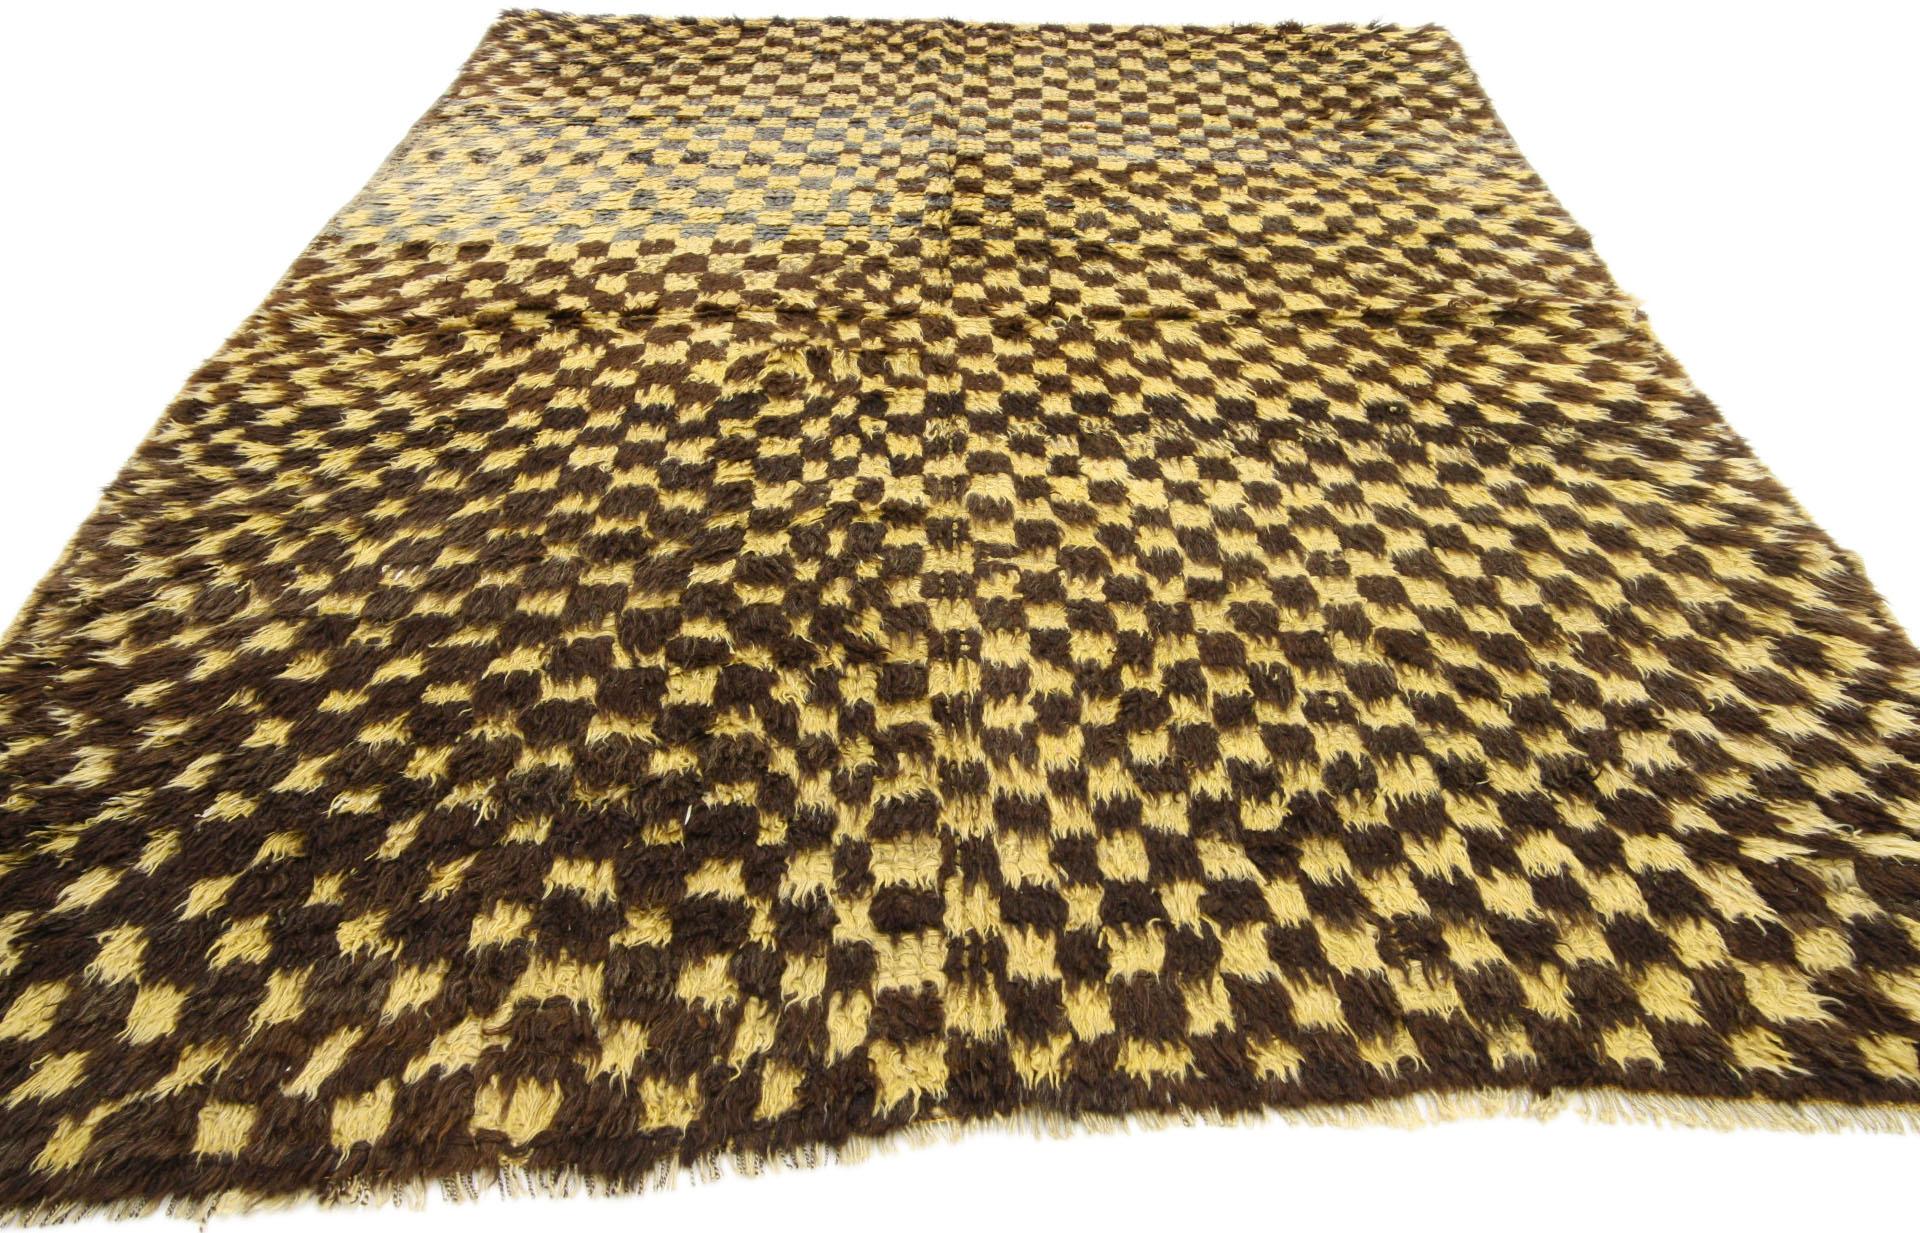 51172, vintage Turkish Tulu Shag rug with Mid-Century Modern style. This hand knotted wool vintage Turkish Tulu rug features an all-over checkerboard pattern composed of alternating yellow and brown squares. The simple, but highly effective design